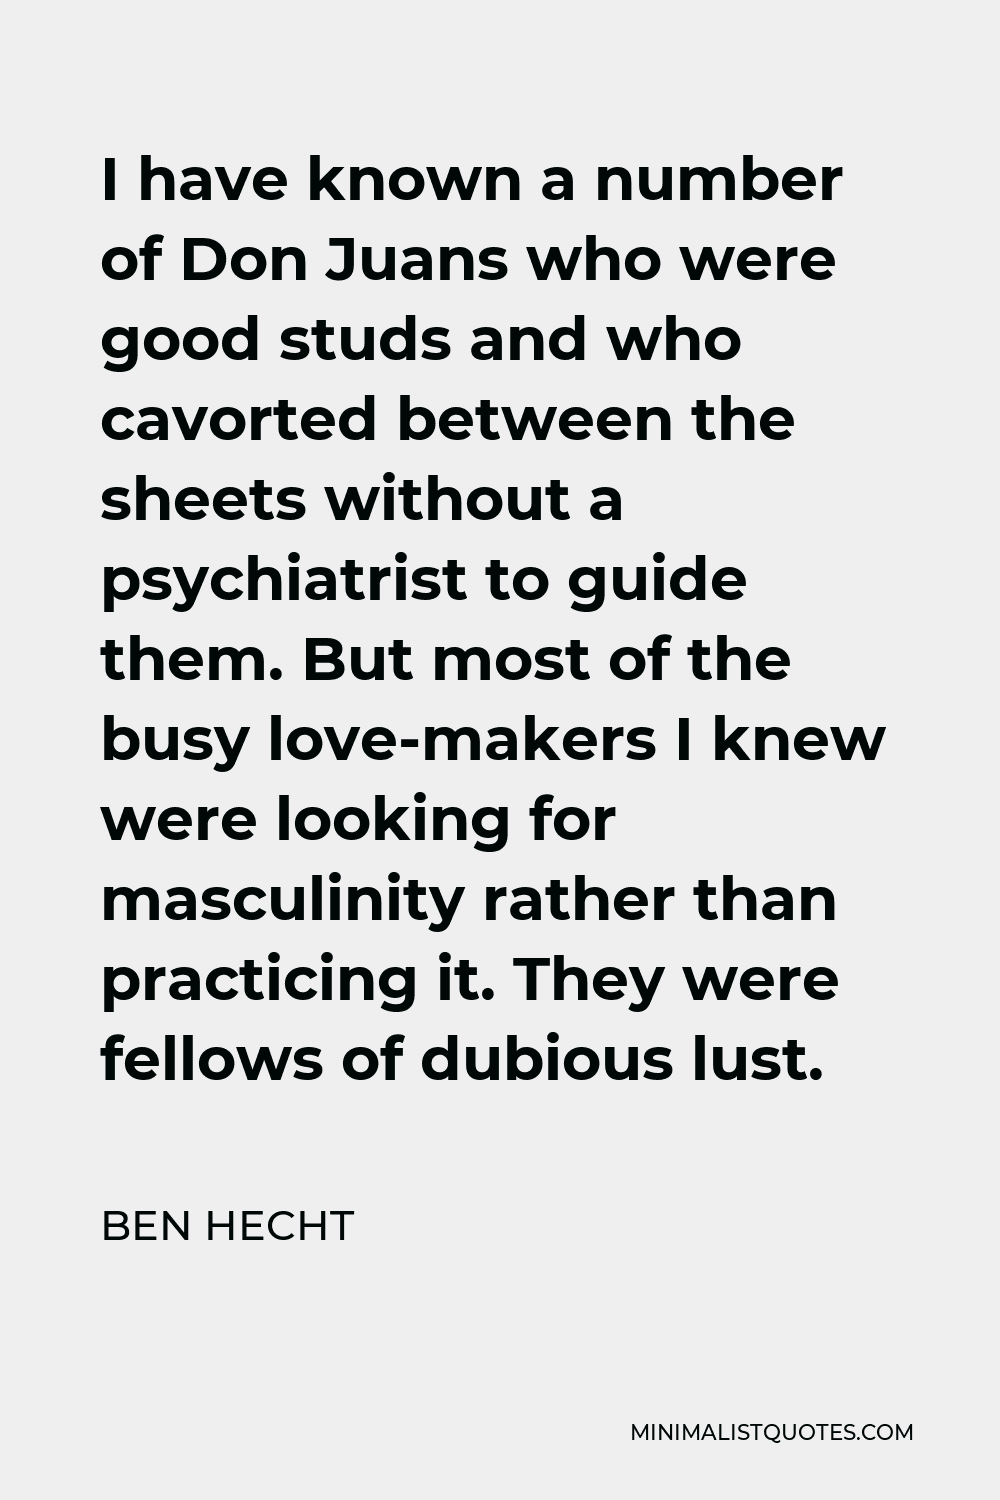 Ben Hecht Quote - I have known a number of Don Juans who were good studs and who cavorted between the sheets without a psychiatrist to guide them. But most of the busy love-makers I knew were looking for masculinity rather than practicing it. They were fellows of dubious lust.